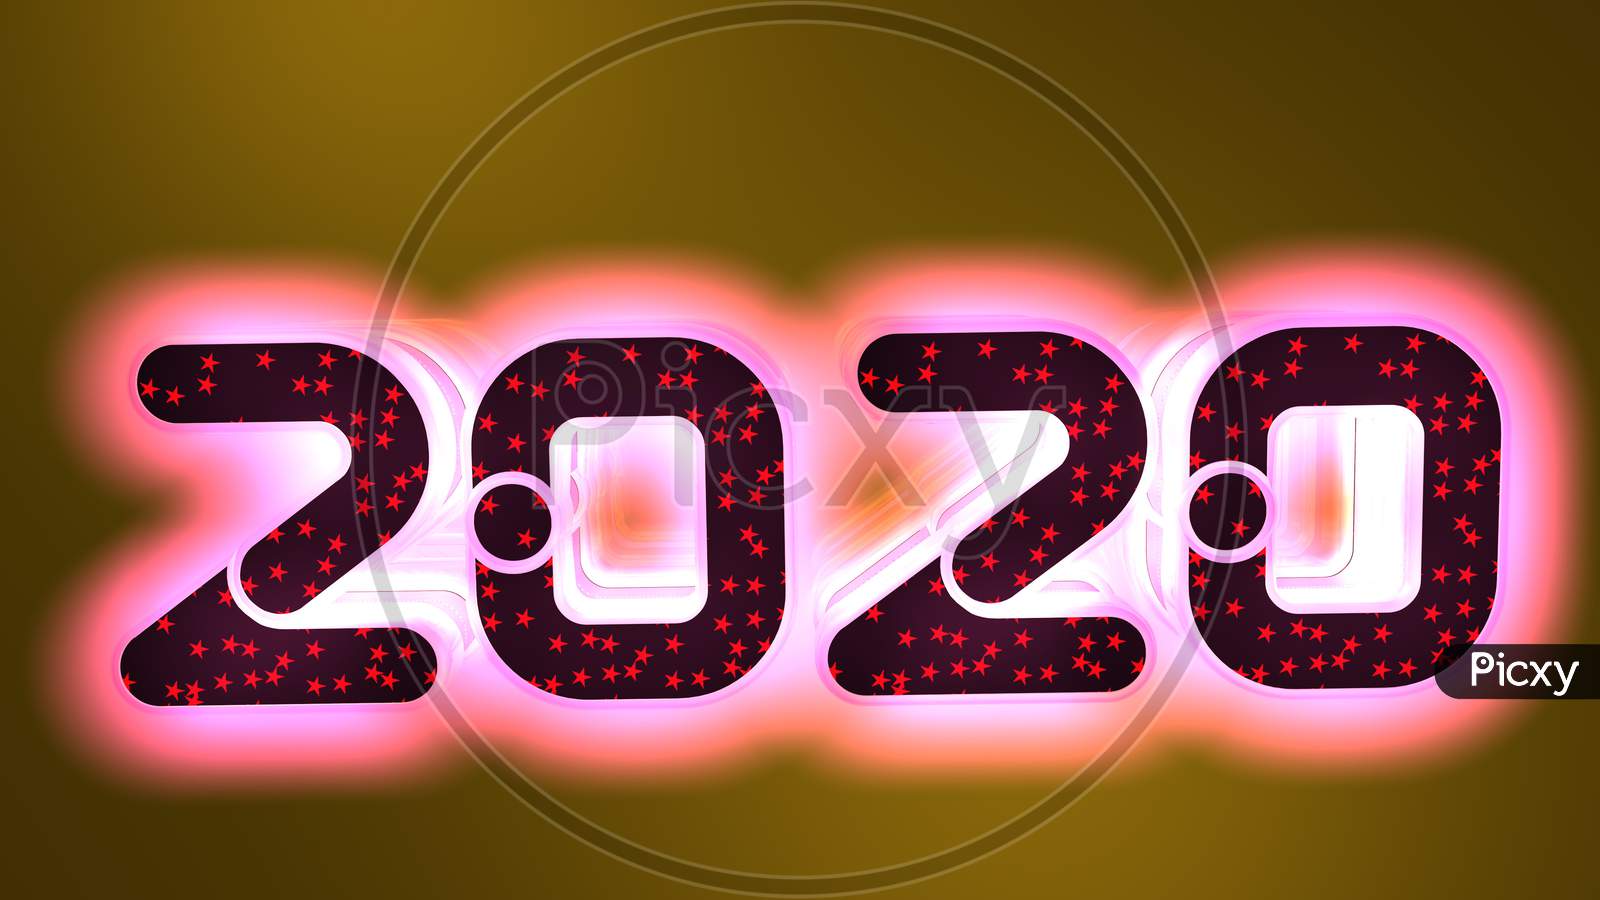 2020 Typography On A Golden Background.